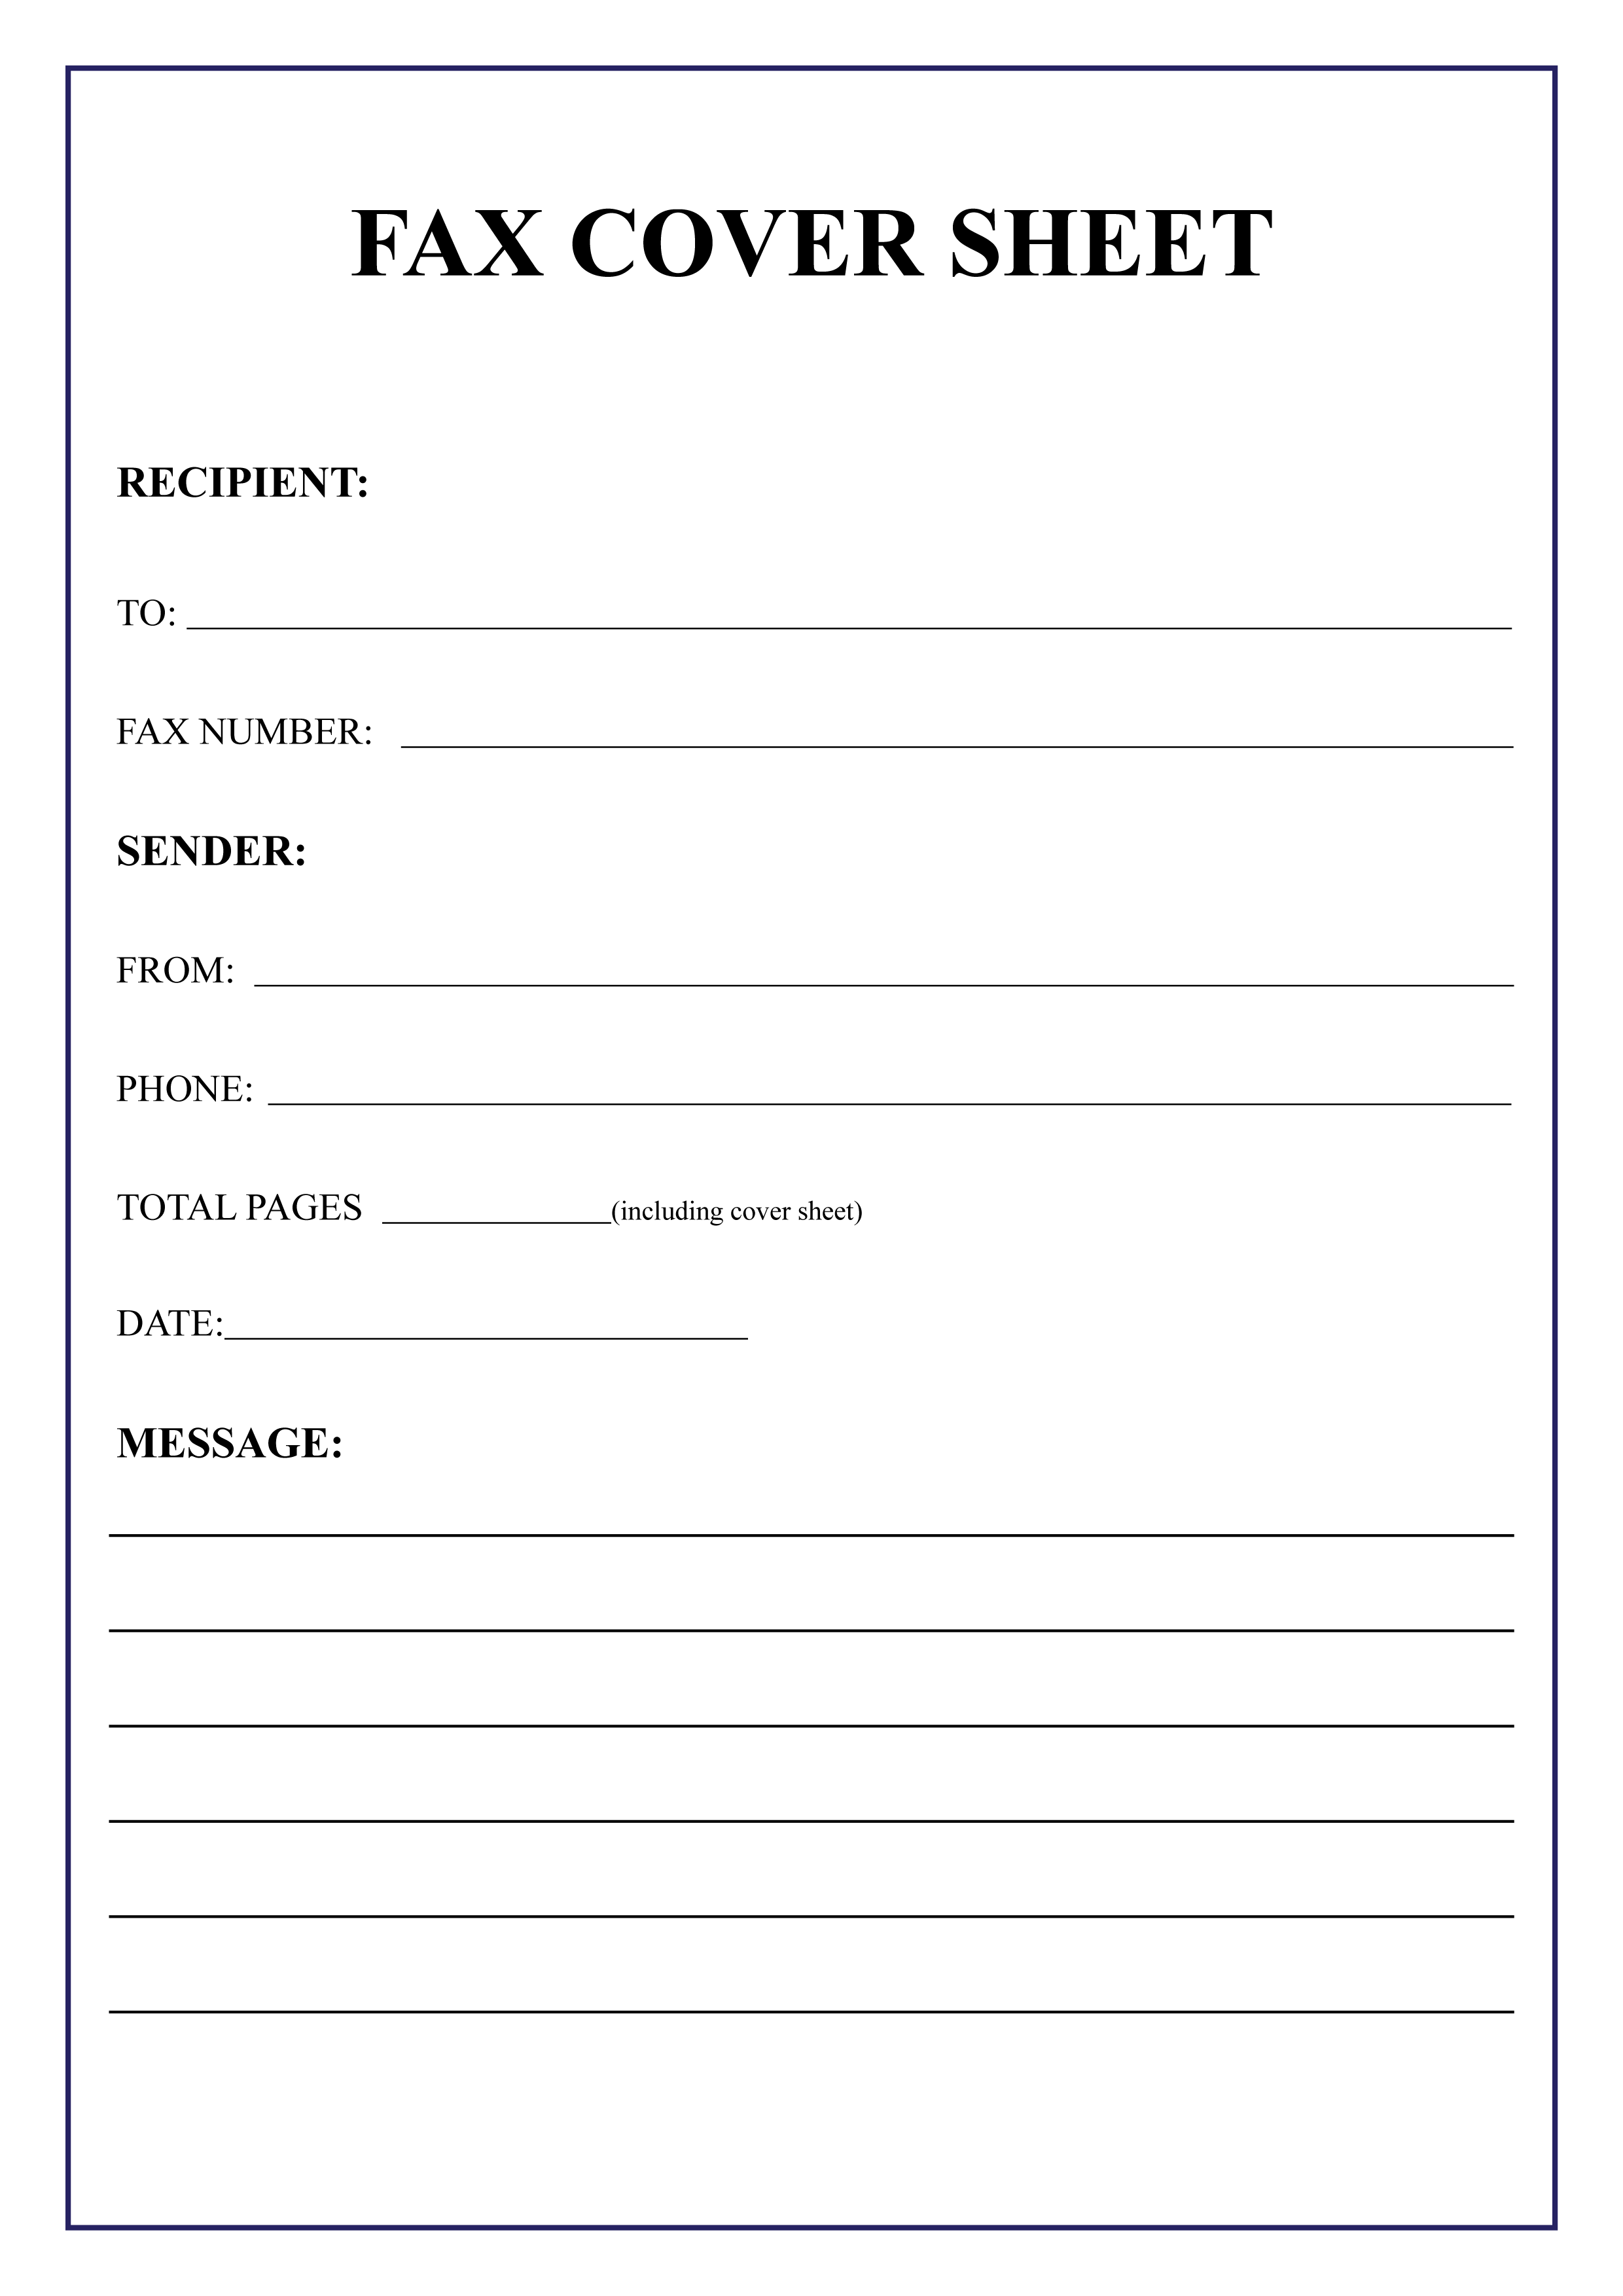 resume fax cover sheet